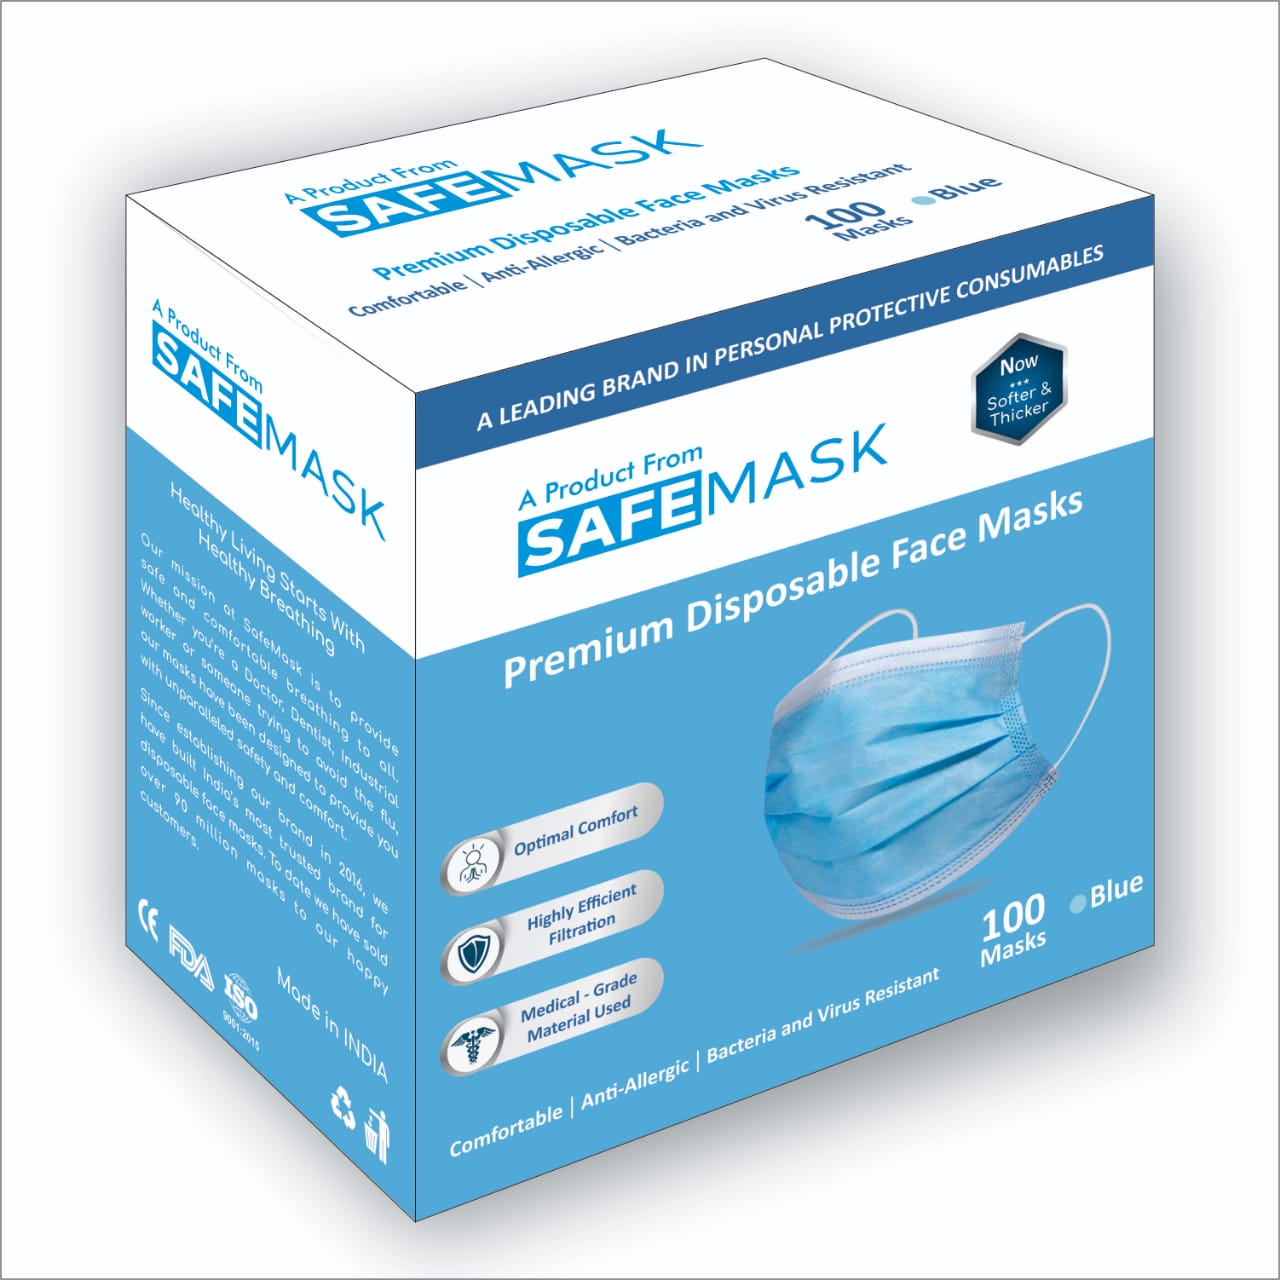 Premium Disposable Face Masks - Safe Mask from Jackpot Durables